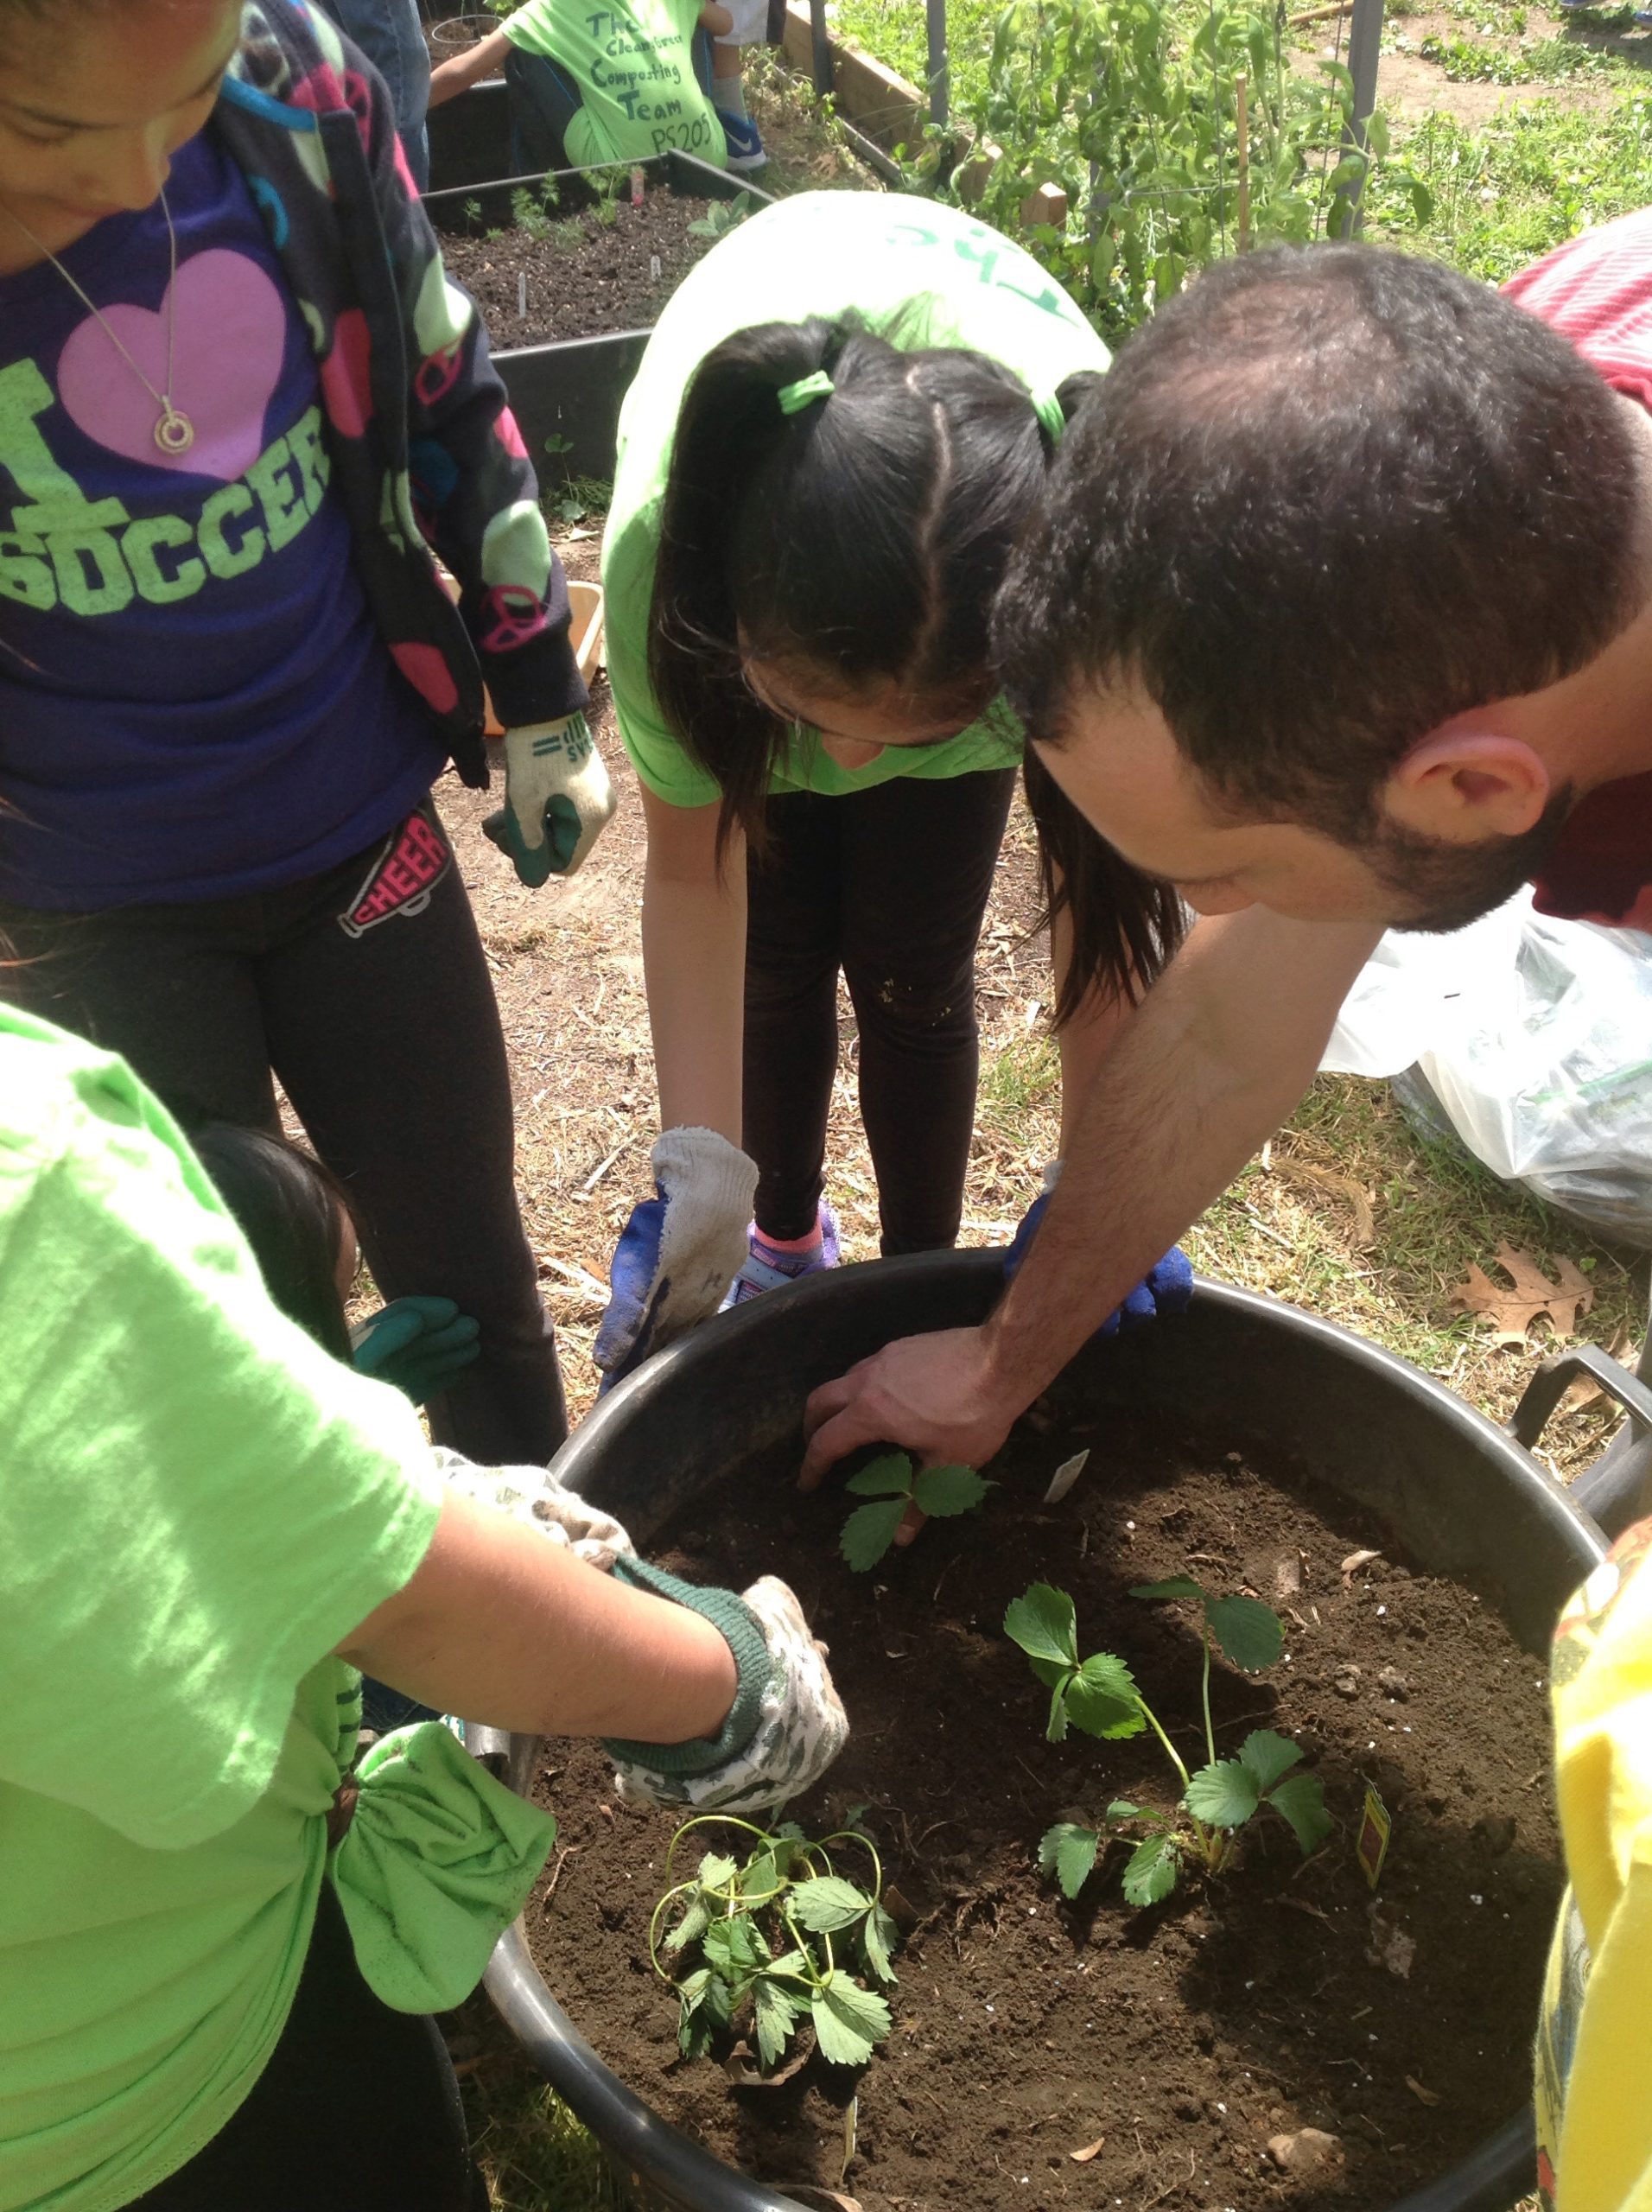 A close-up of people planting a garden.